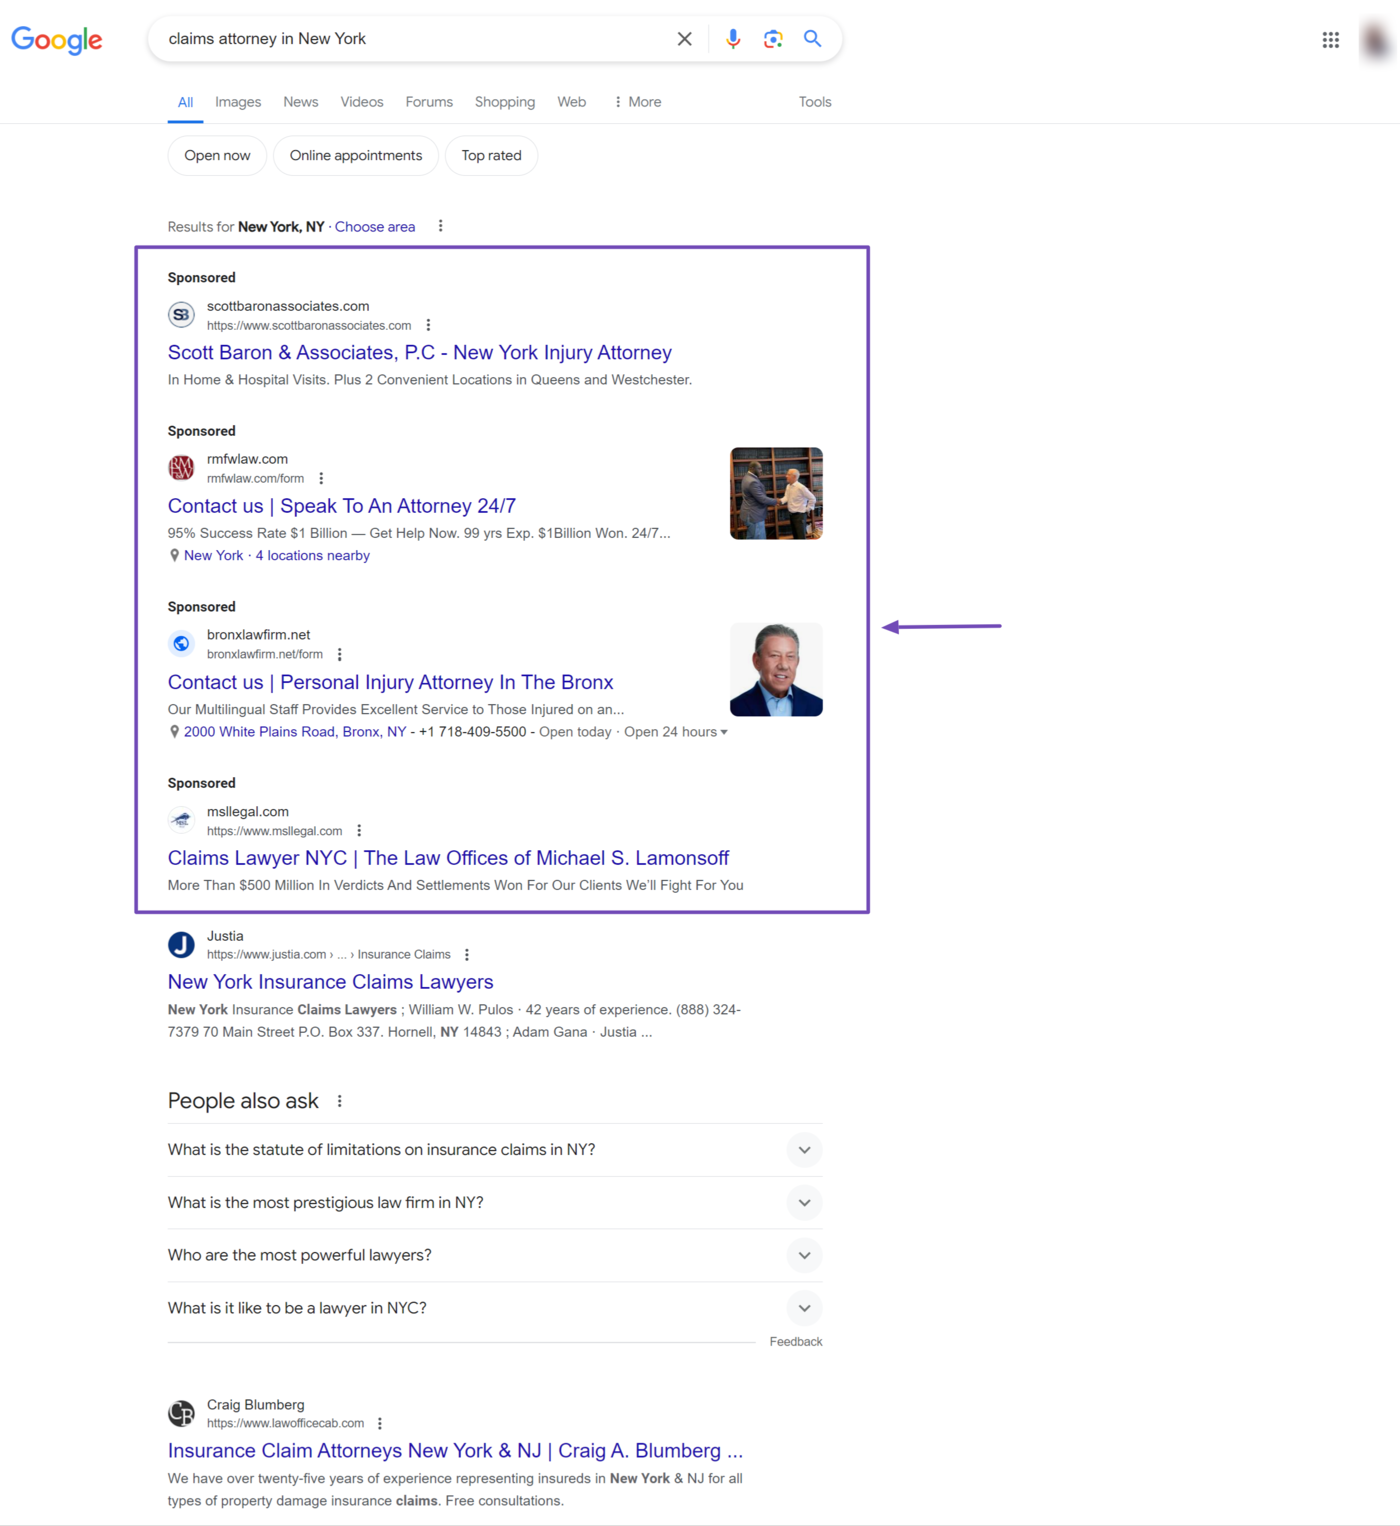  Sample of a Search ad on Google search results pages